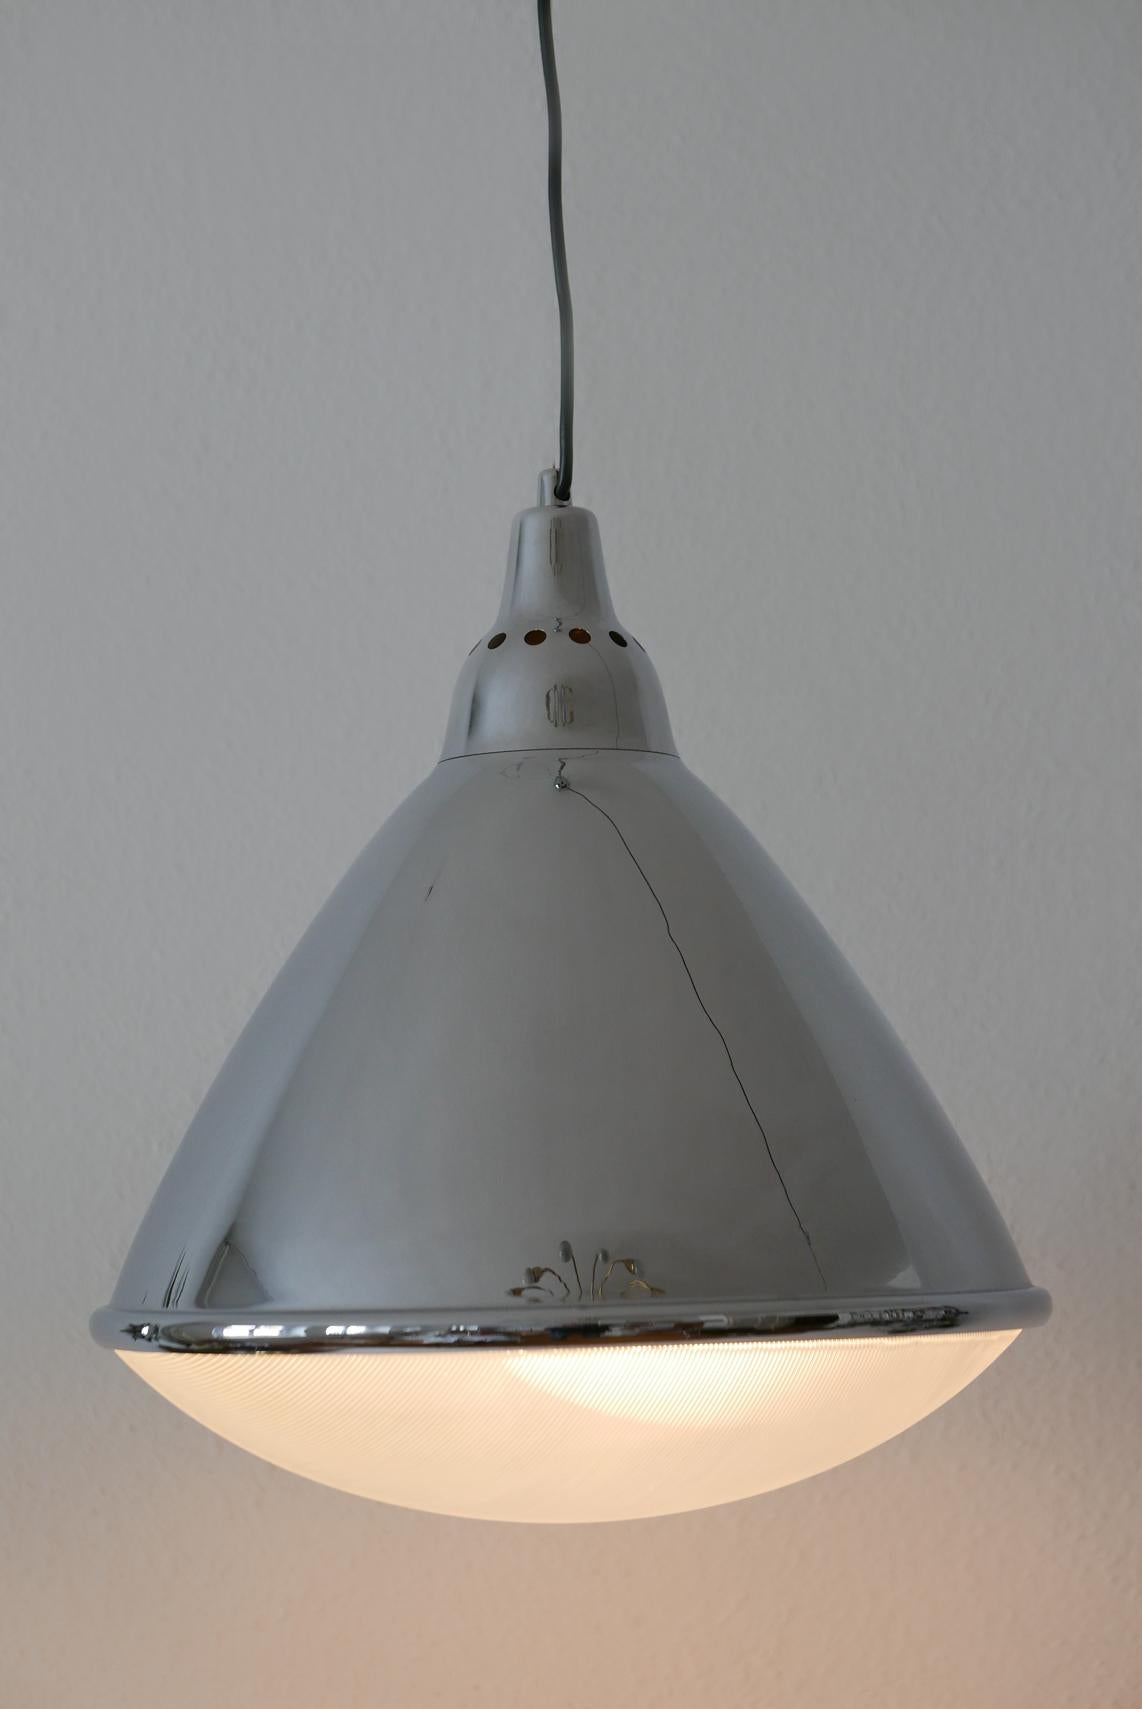 Mid-Century Modern 'Headlight' pendant lamp by Ingo Maurer for Design M, 19768, Germany.

Executed in chrome-plated metal and plastic. It needs 1 x E27 Edison screw fit bulb. It runs both on 110 / 230 volt.

Dimensions:
H 17.33 in. x Dm 15.36 in. /